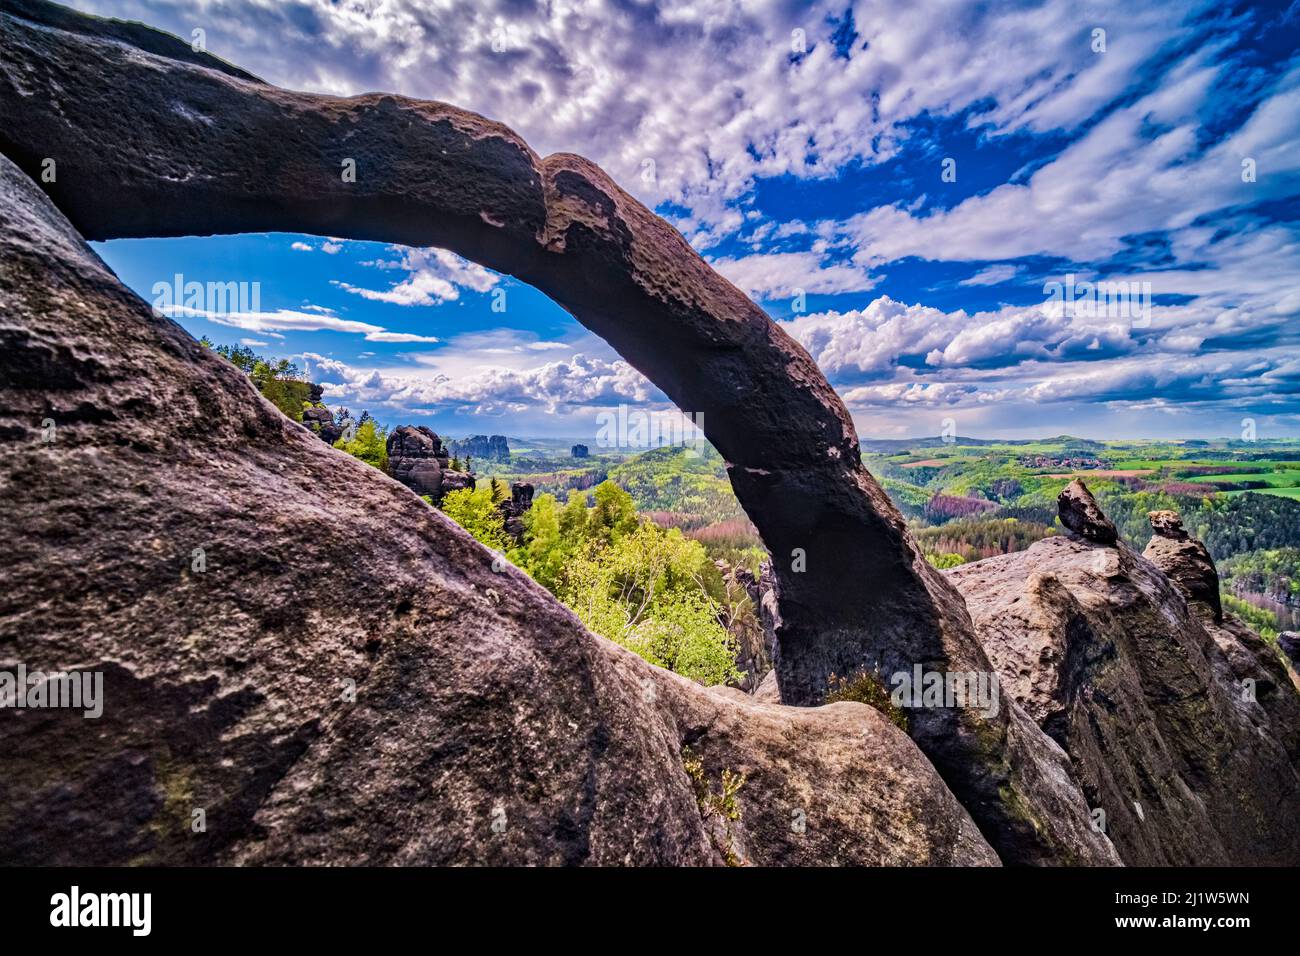 Landscape with rock formations in Affensteine area of the Saxon Switzerland National Park. Stock Photo